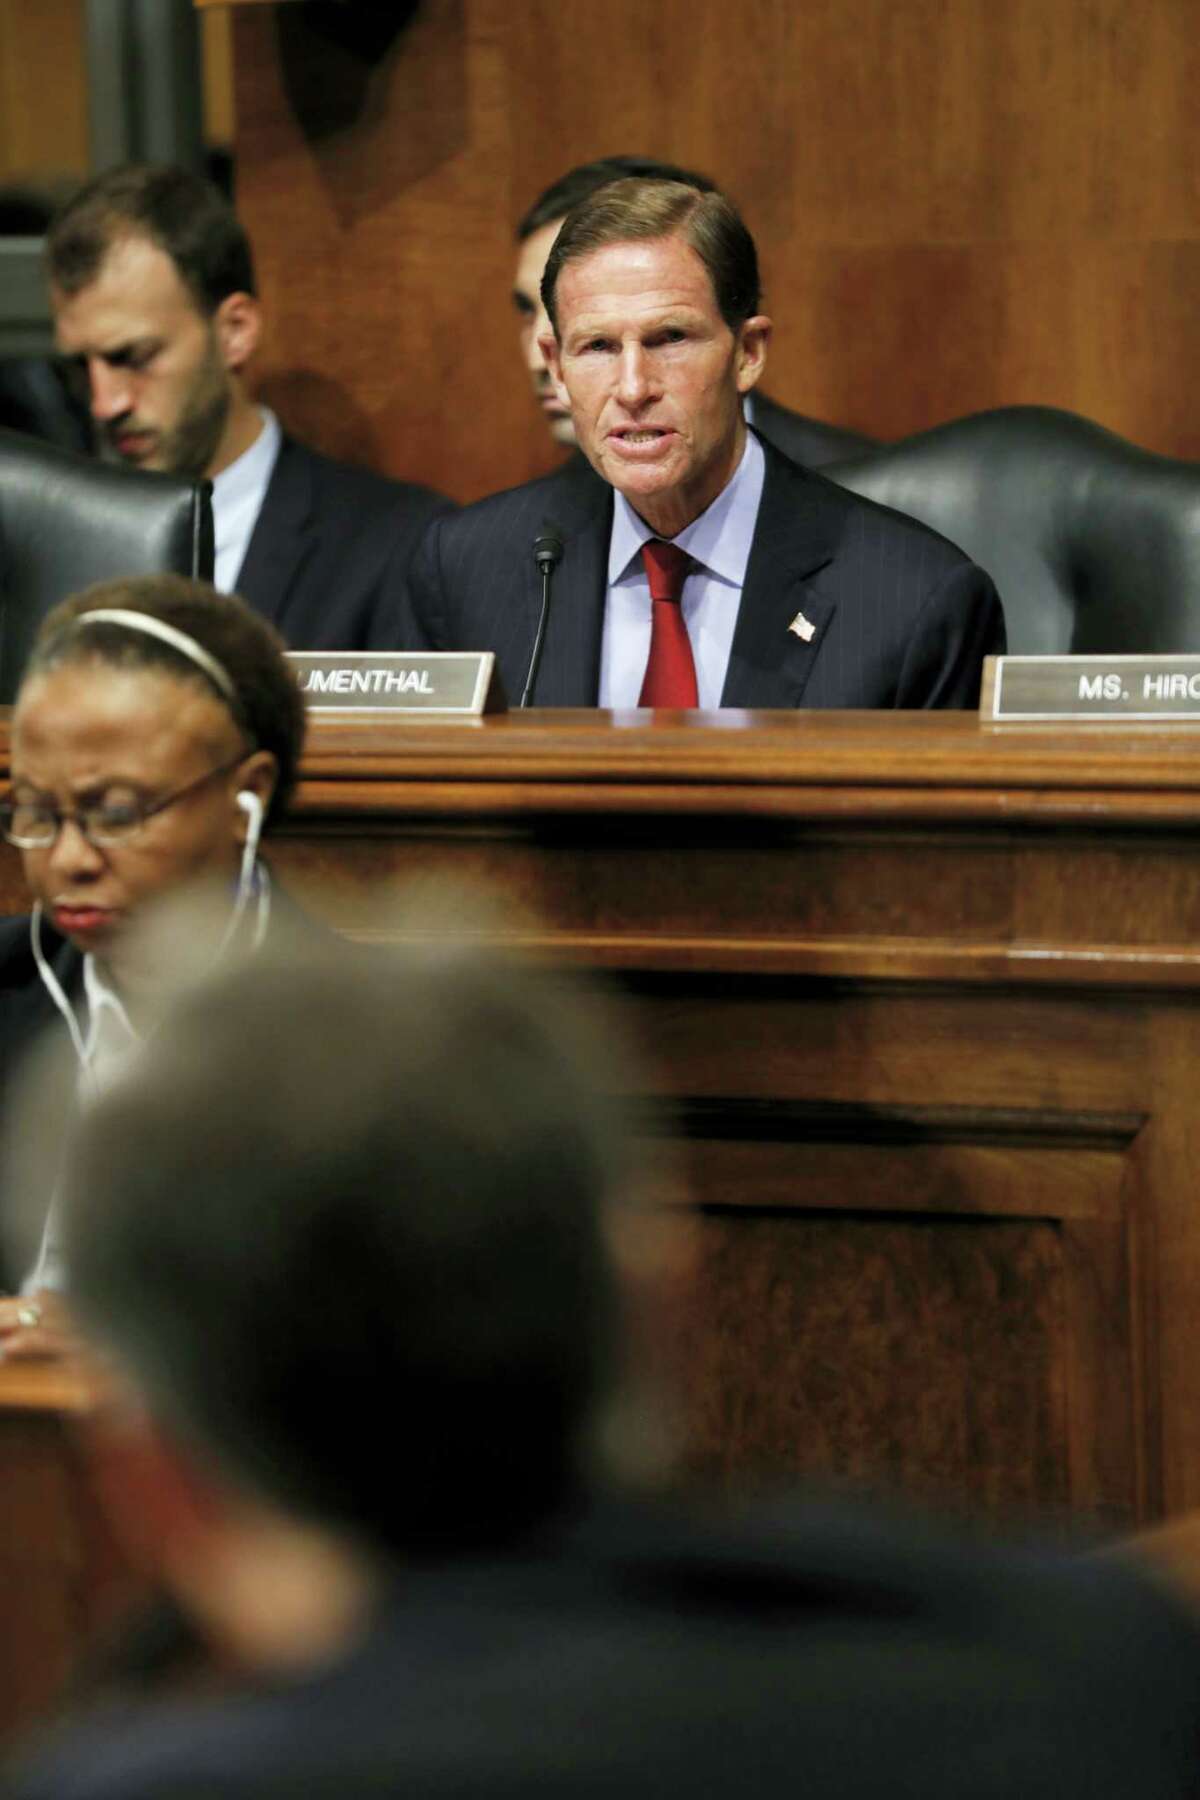 Senate Judiciary Committee member Sen. Richard Blumenthal, D-Conn. questions FBI Director nominee Christopher Wray on Capitol Hill in Washington, Wednesday, July 12, 2017, during Wray’s confirmation hearing before the committee.